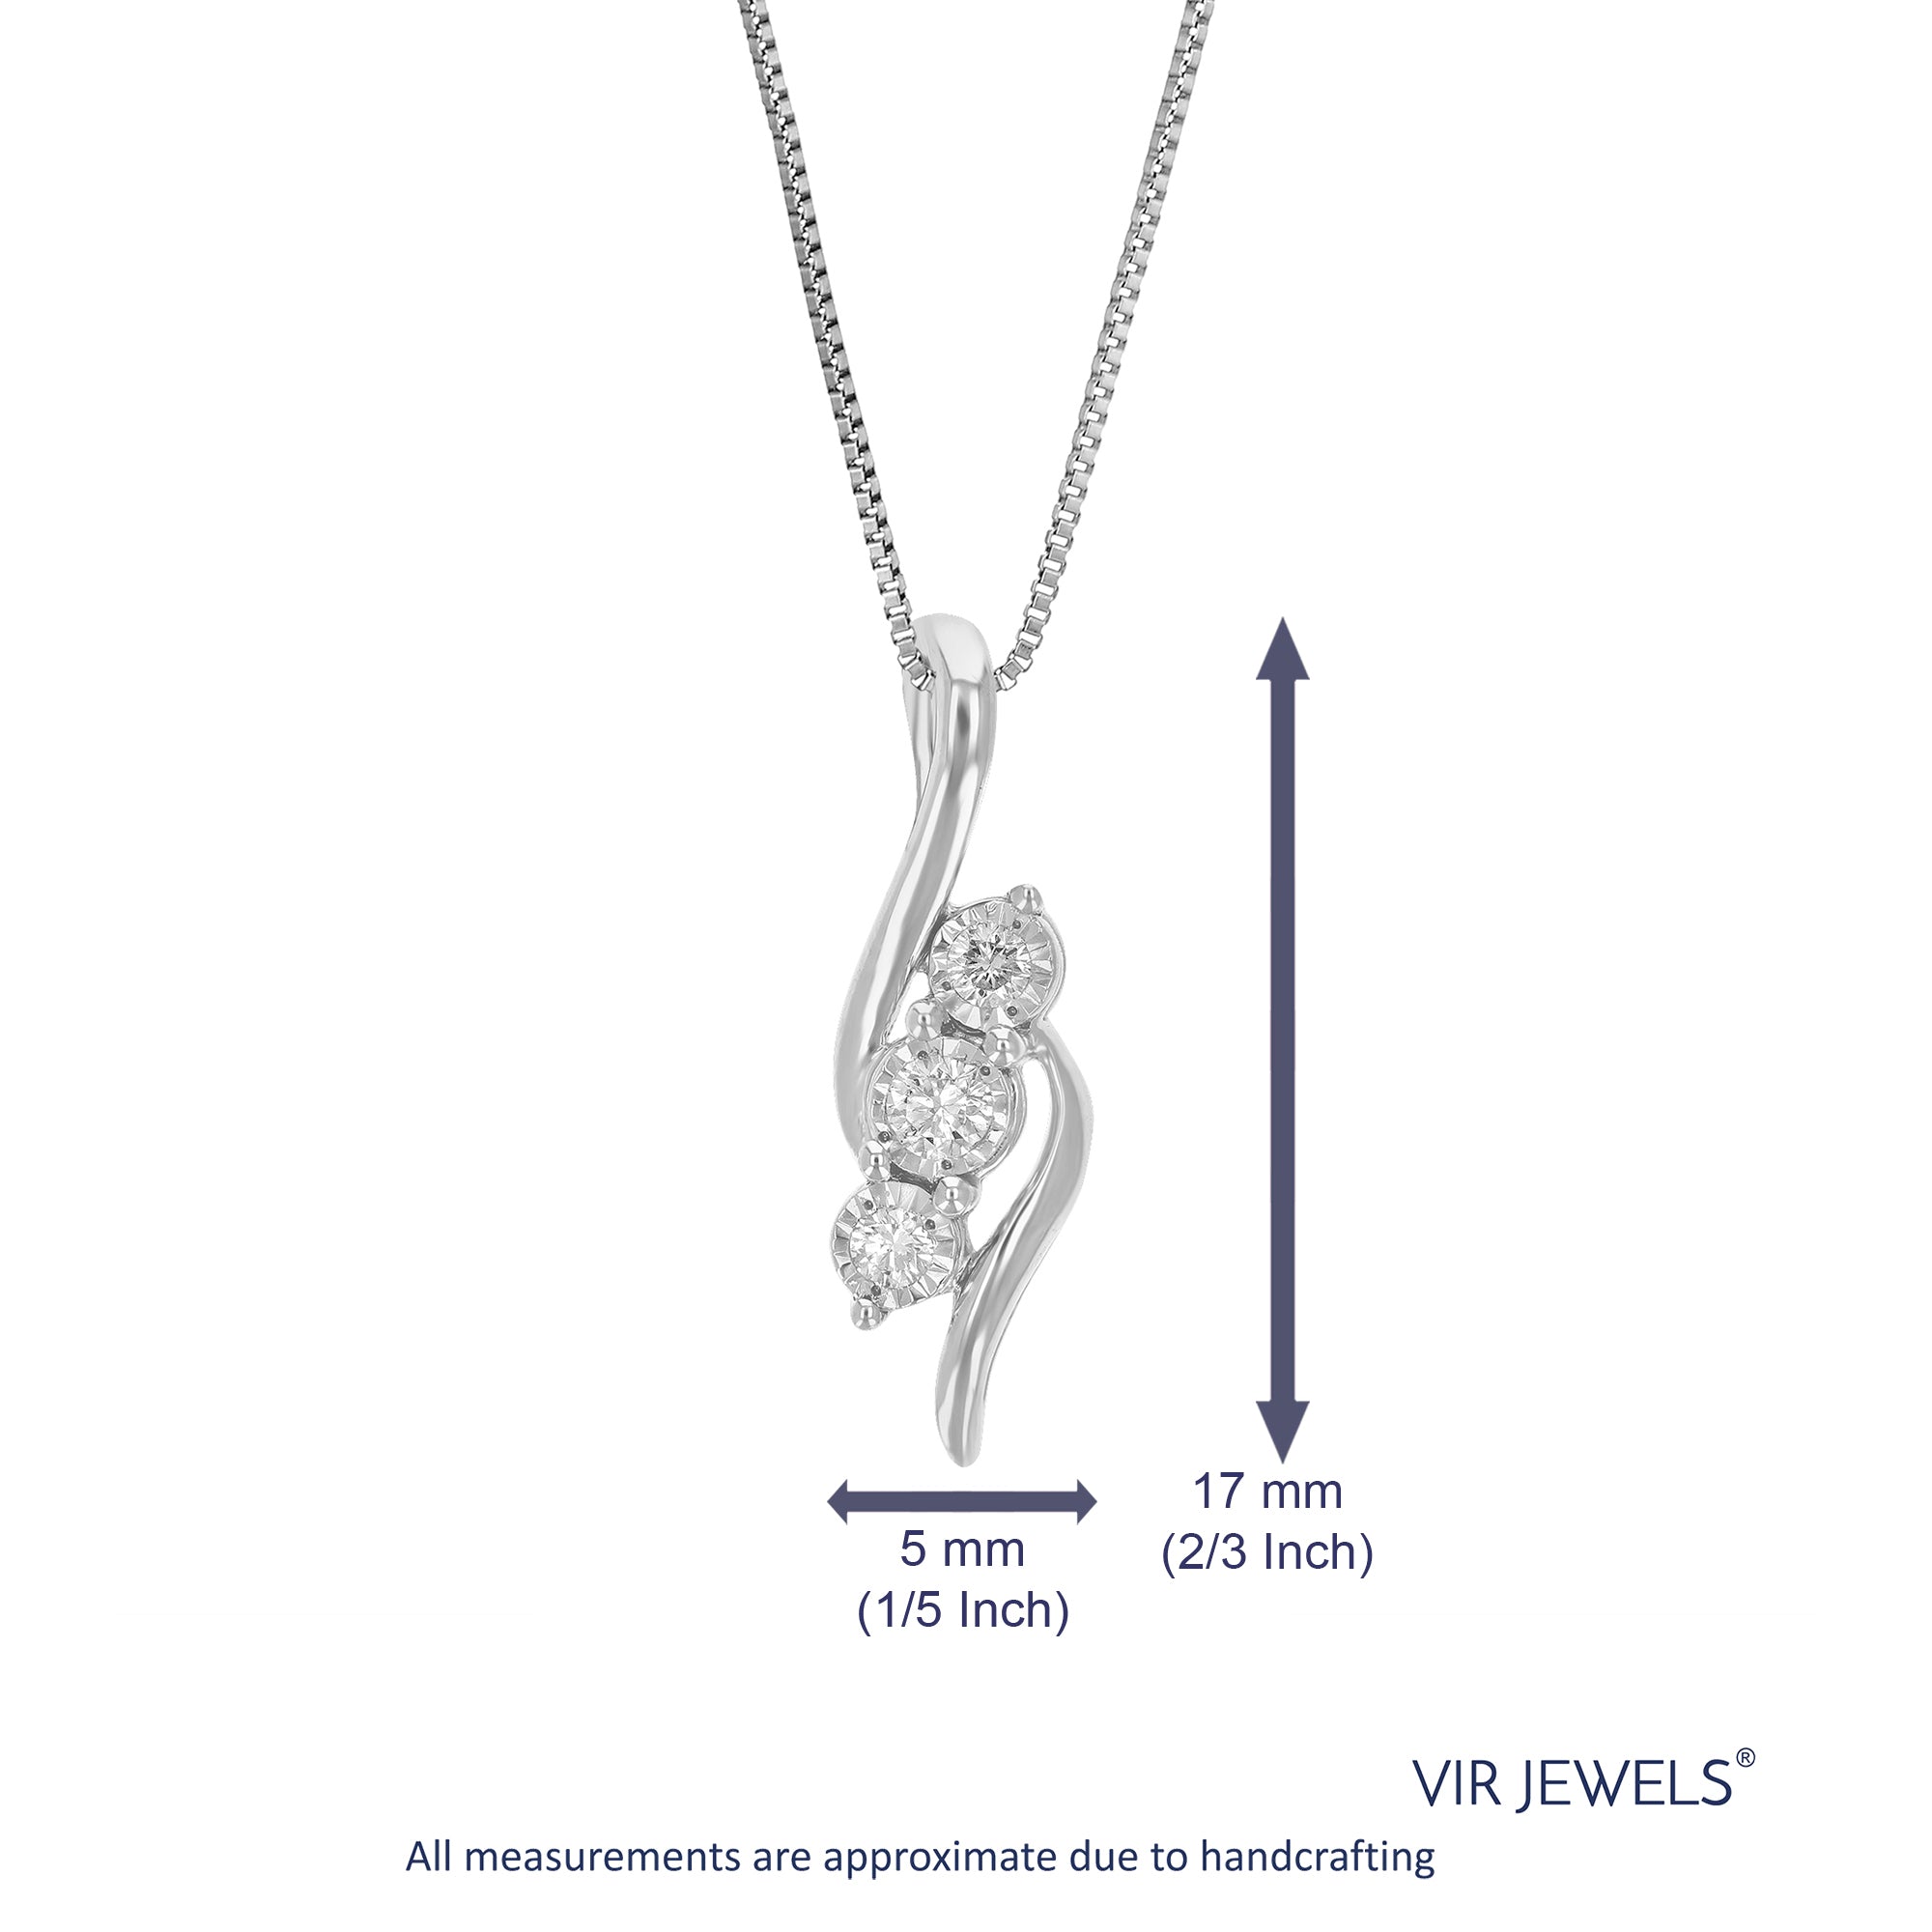 1/10 cttw Diamond Pendant Necklace for Women, Lab Grown Diamond Bypass Pendant Necklace in .925 Sterling Silver with Chain, Size 2/3 Inch